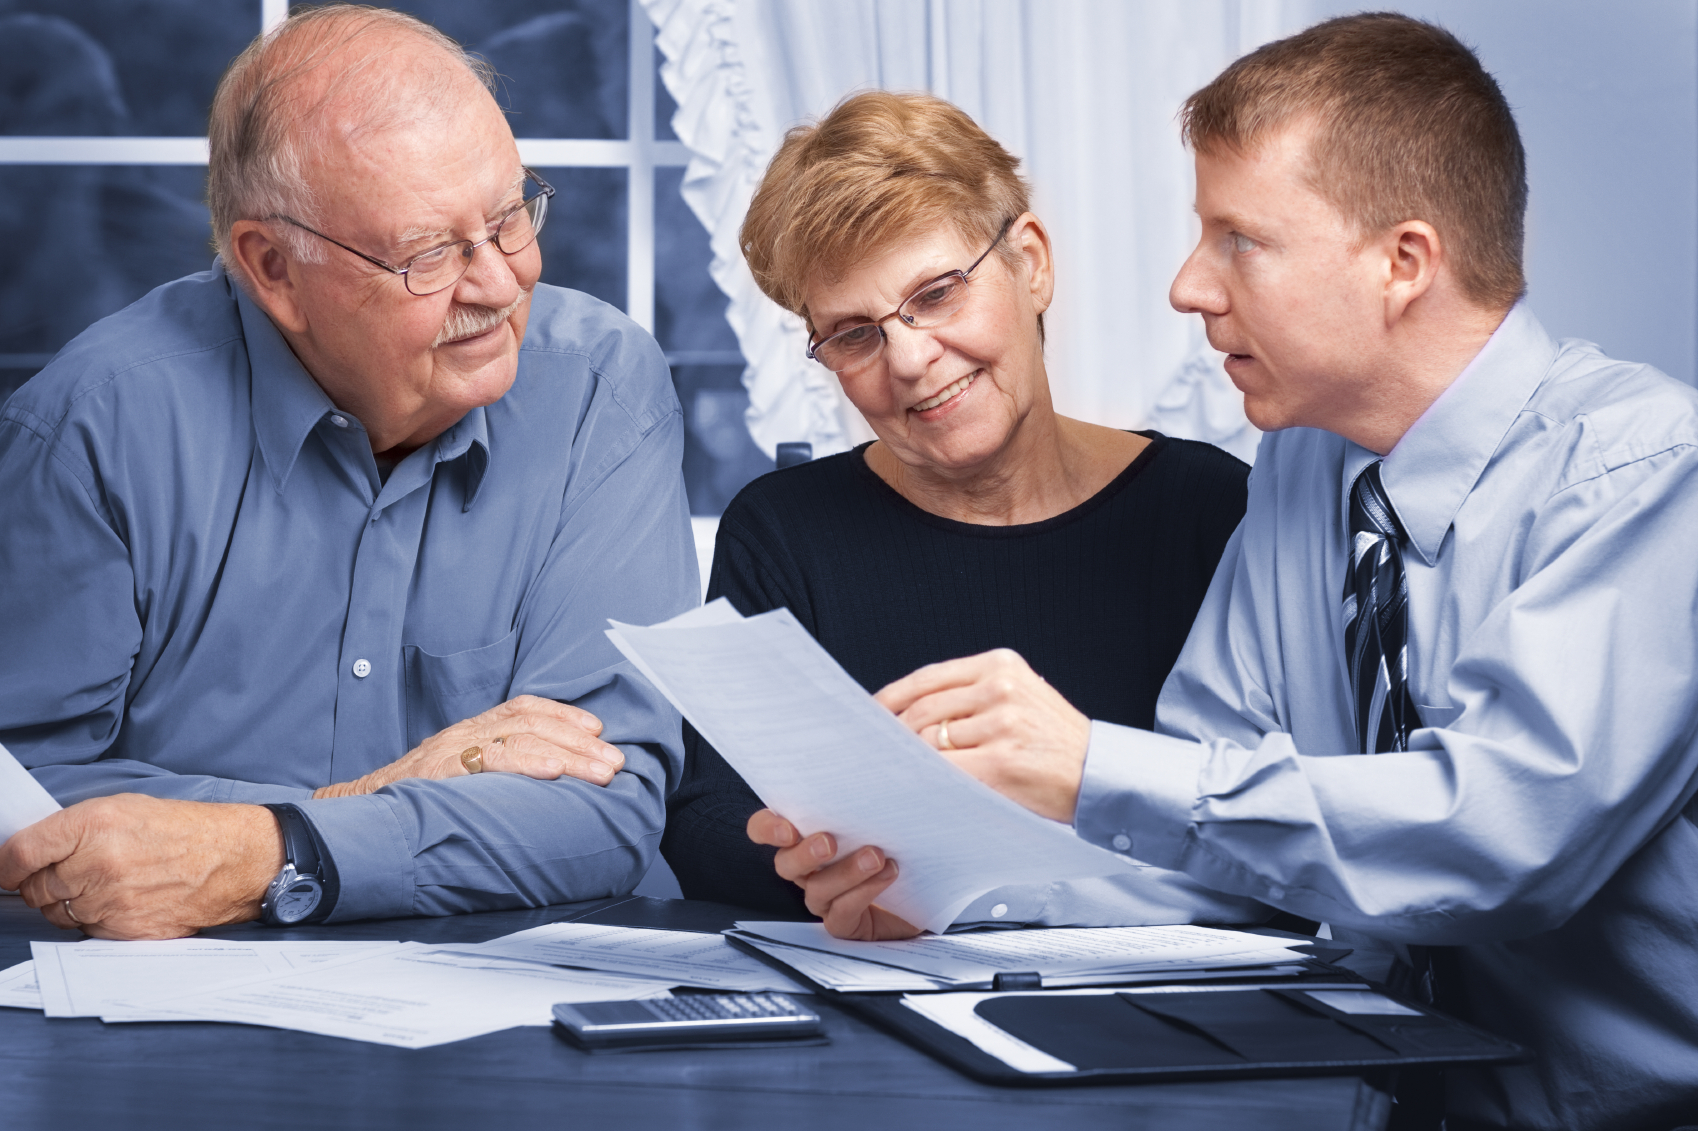 Our firm takes pride in providing comprehensive retirement planning services to our clients.